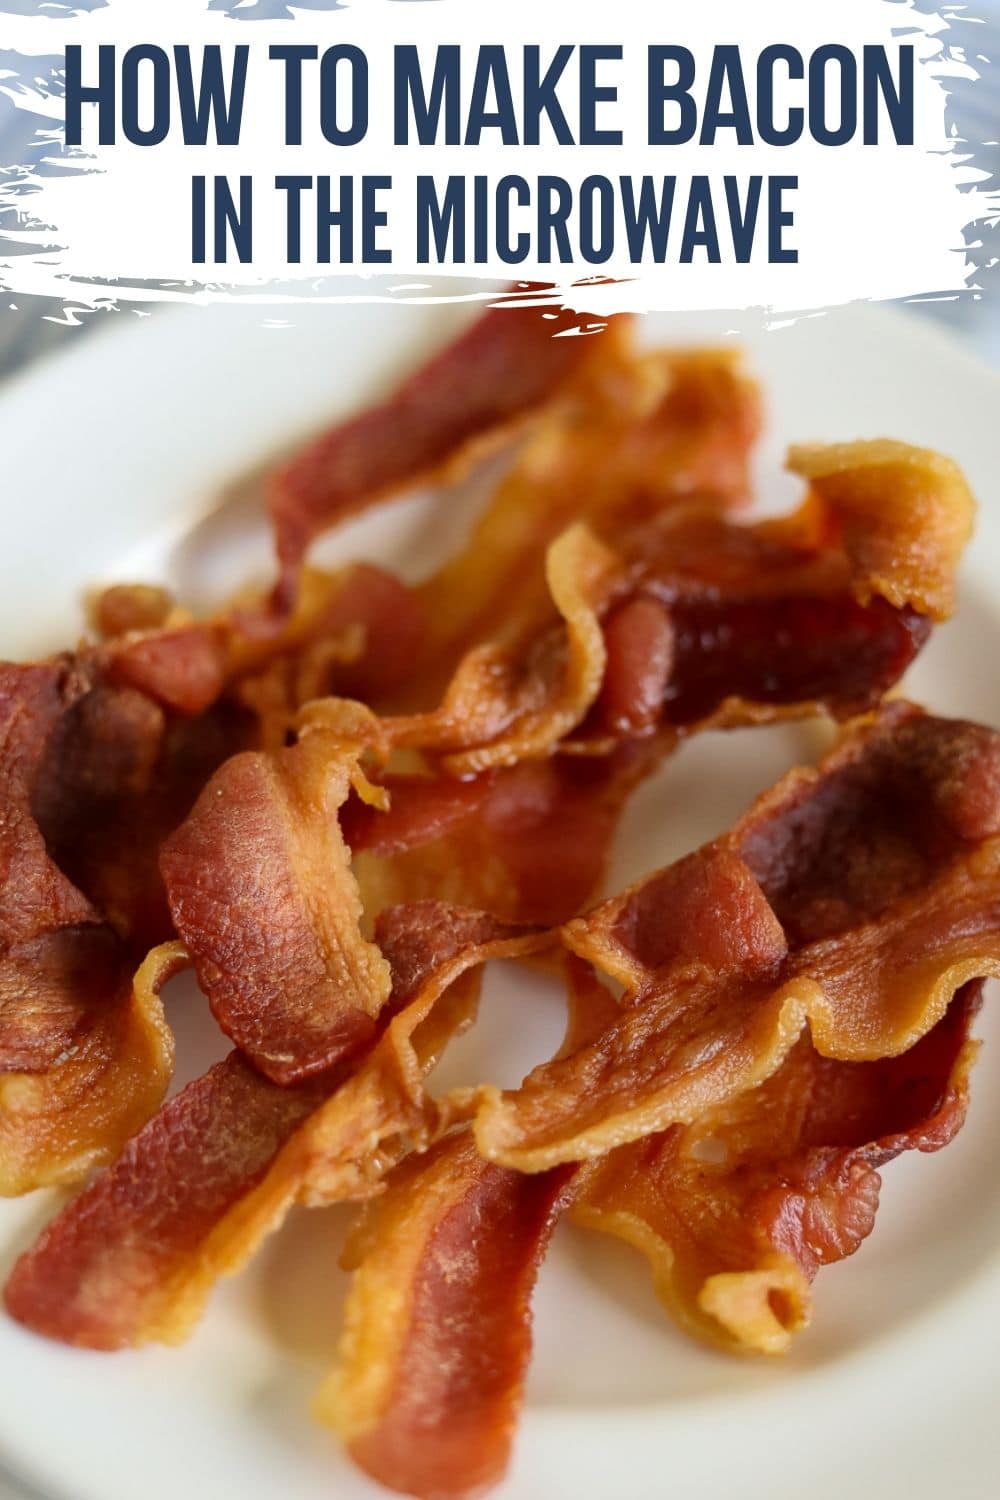 https://kaseytrenum.com/wp-content/uploads/2022/05/HOW-TO-COOK-BACON-IN-THE-MICROWAVE-1.jpg